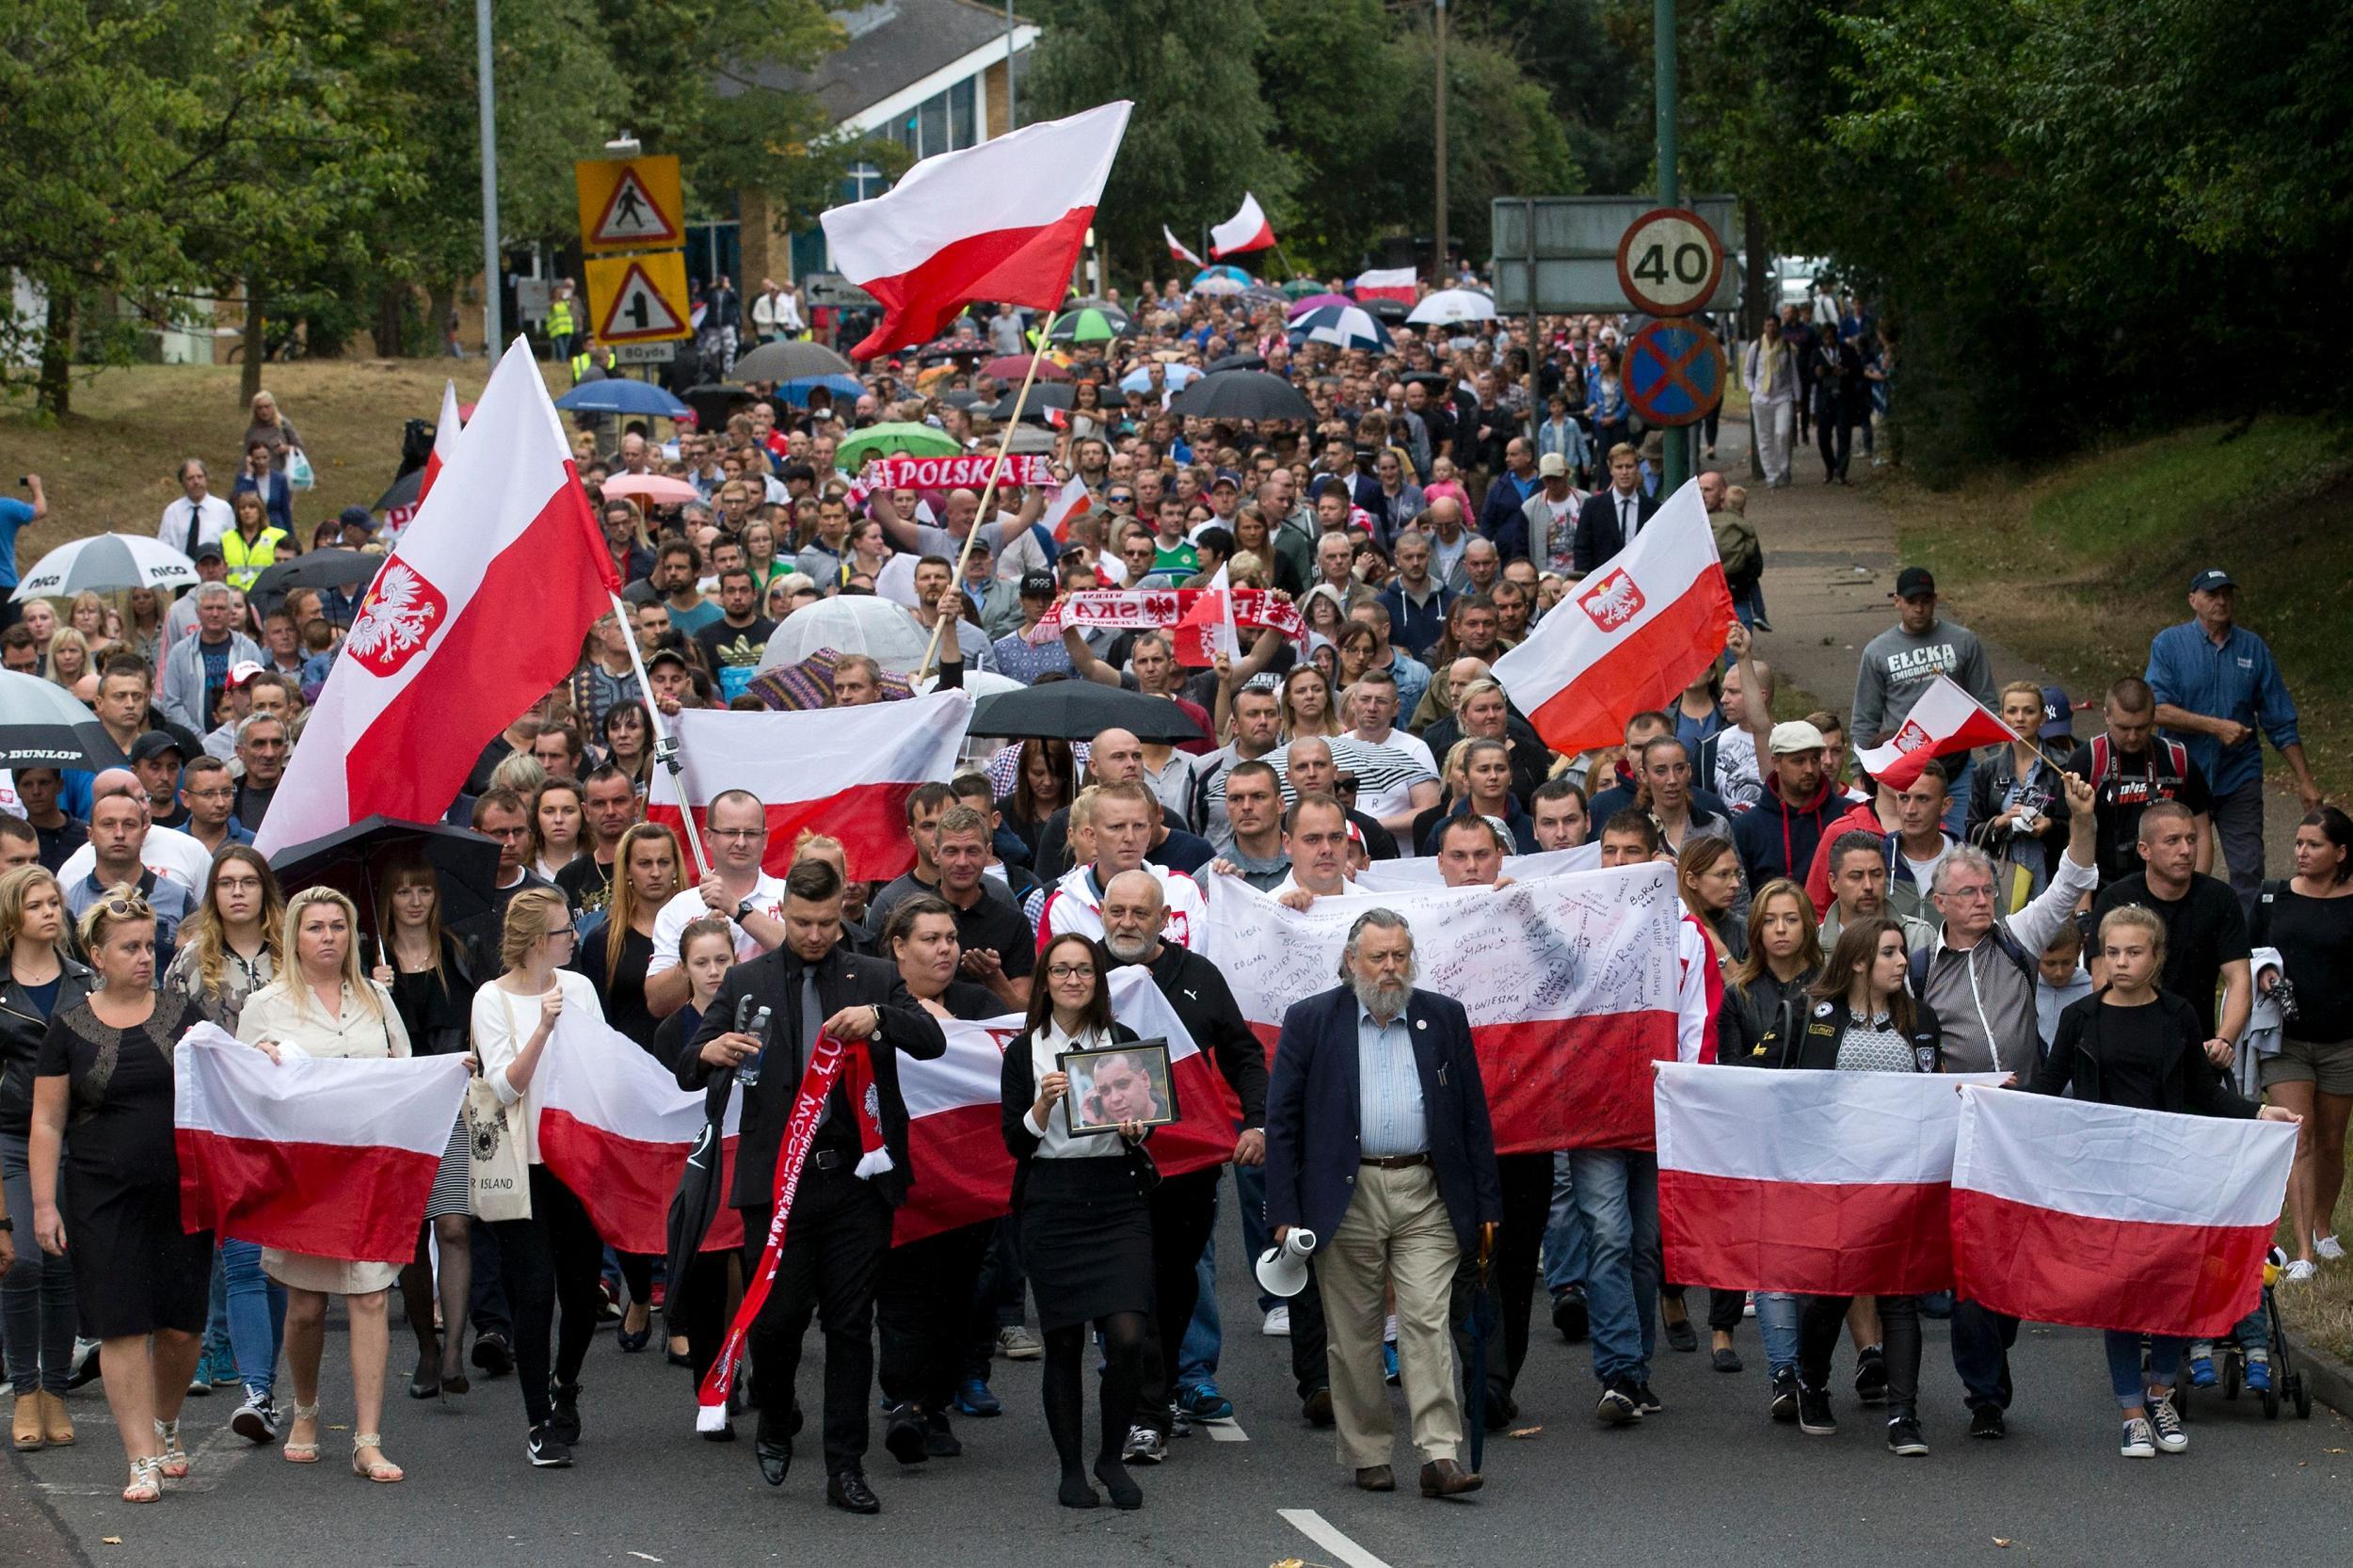 Hundreds of local residents in Harlow, Essex marched in support of the Polish community after a man was killed in hate crime attack